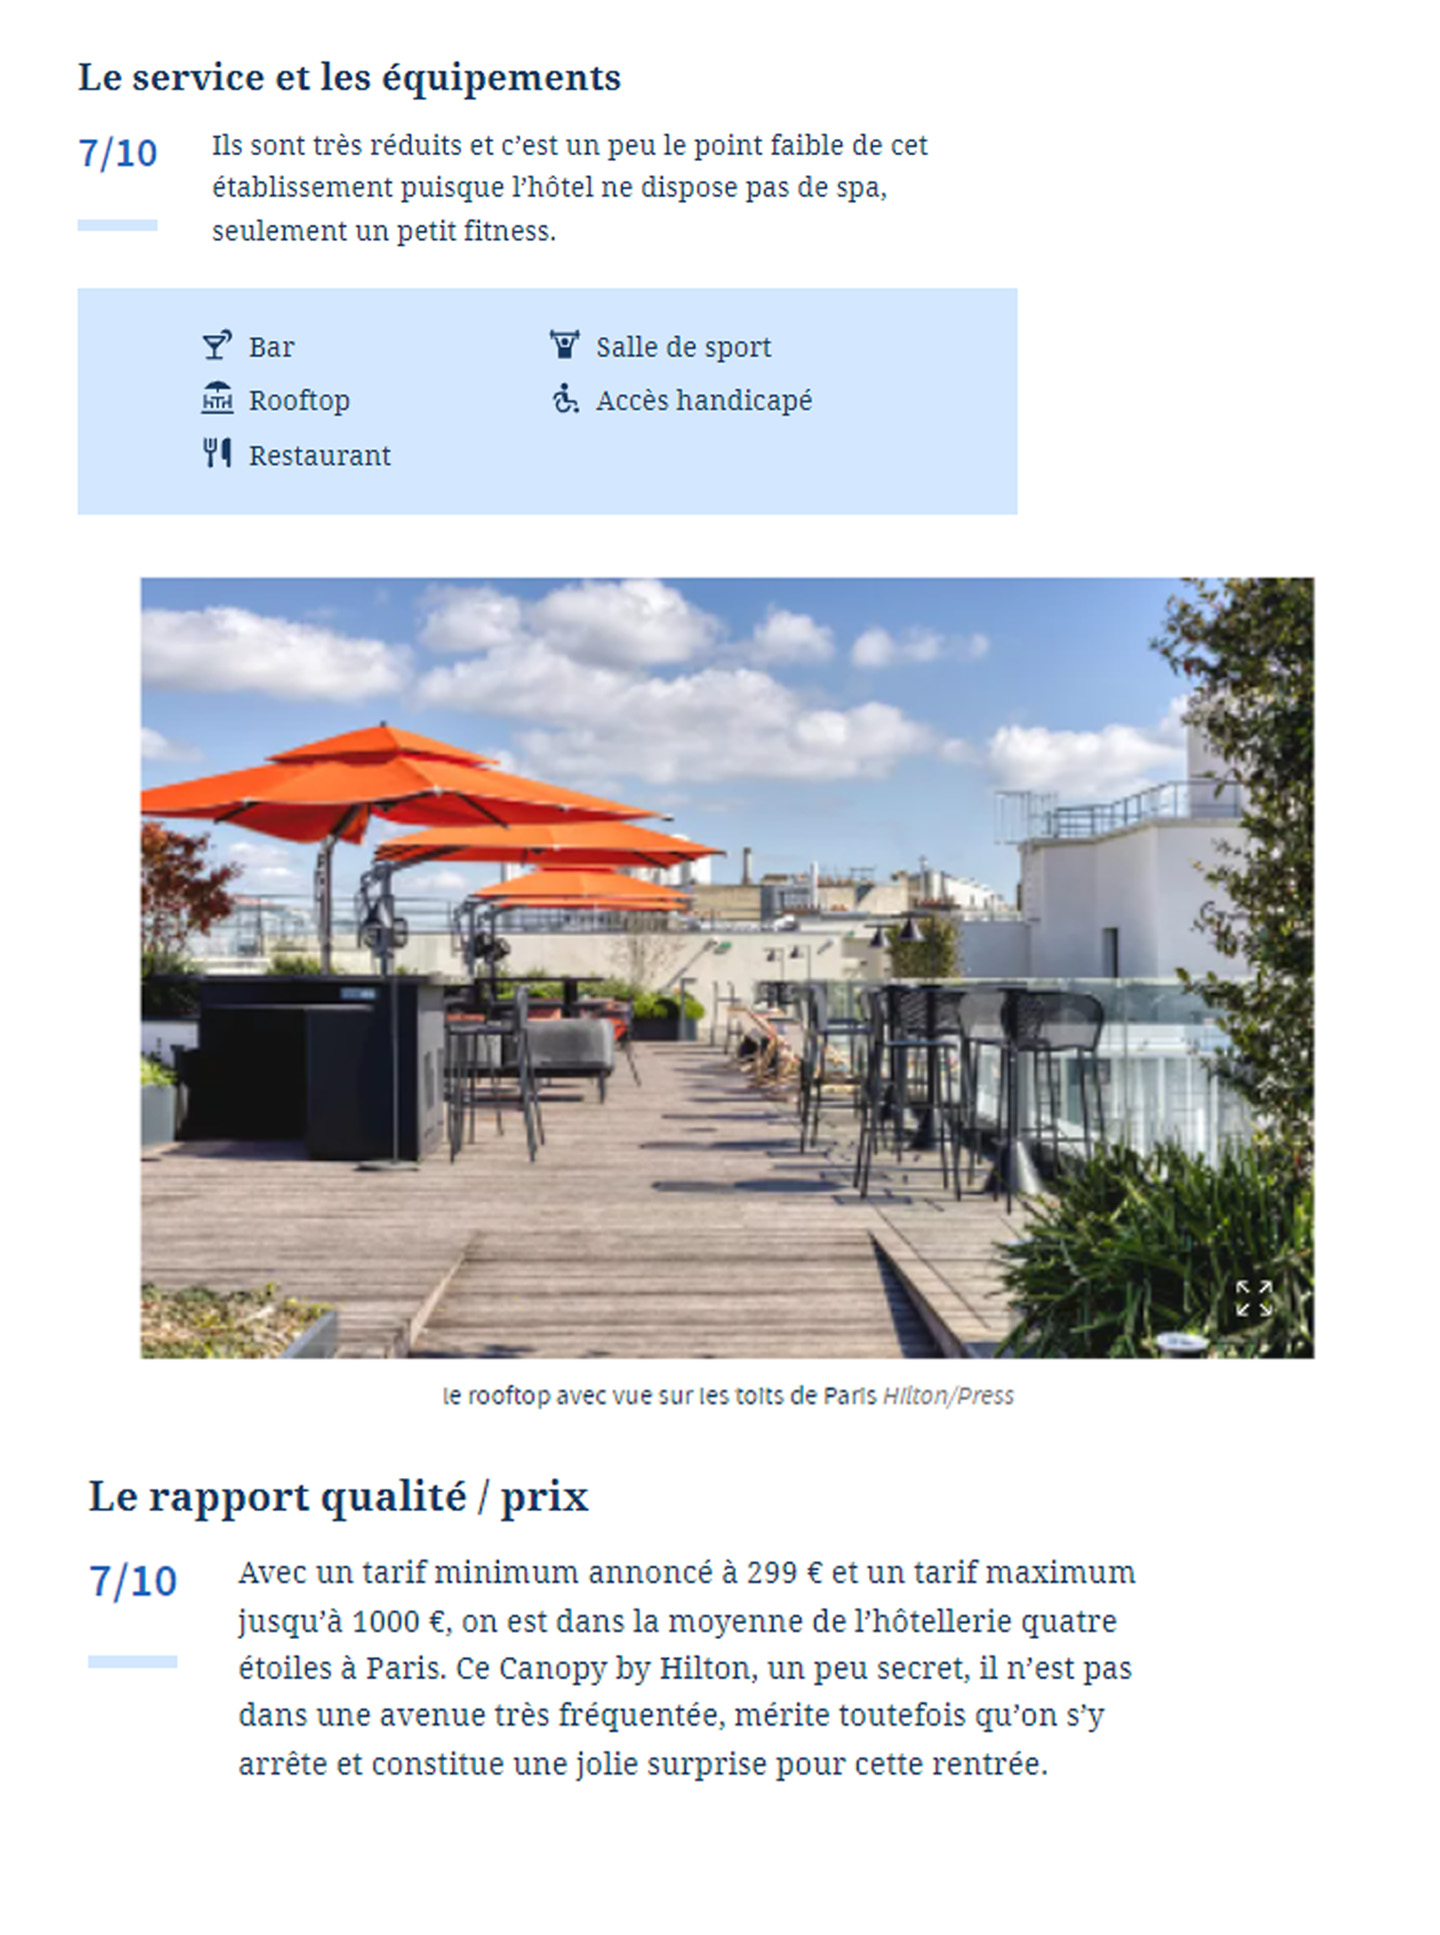 Article on the Canopy by Hilton Paris Trocadero designed by jean-Philippe Nuel studio in Le Figaro magazine, new lifestyle hotel, luxury interior design, paris center, french luxury hotel